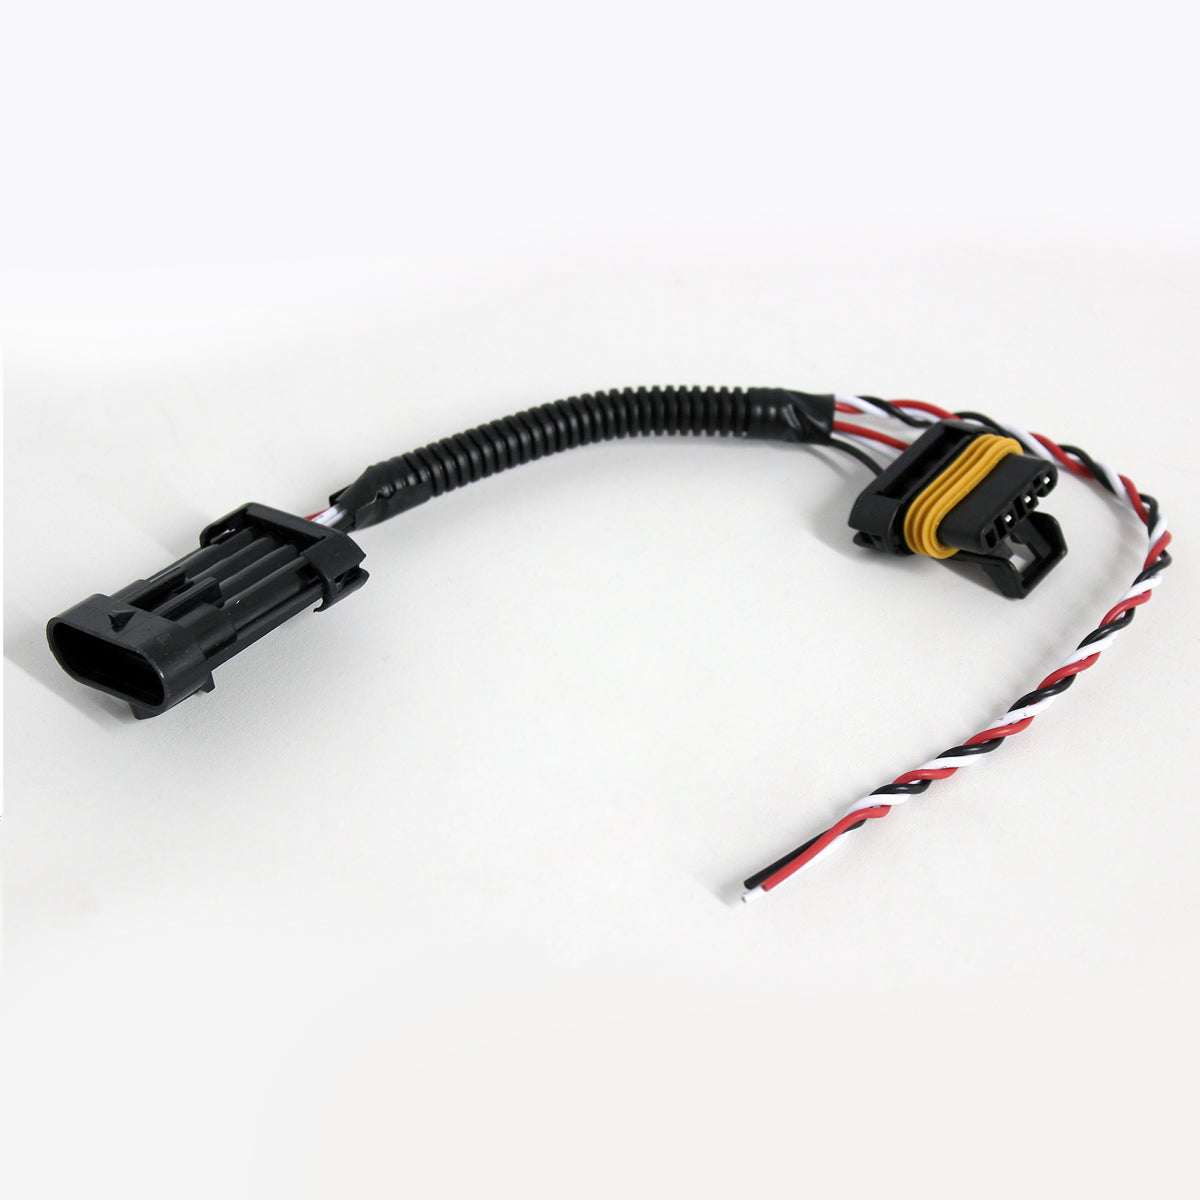 Taillight Pigtail Harness for Polaris®